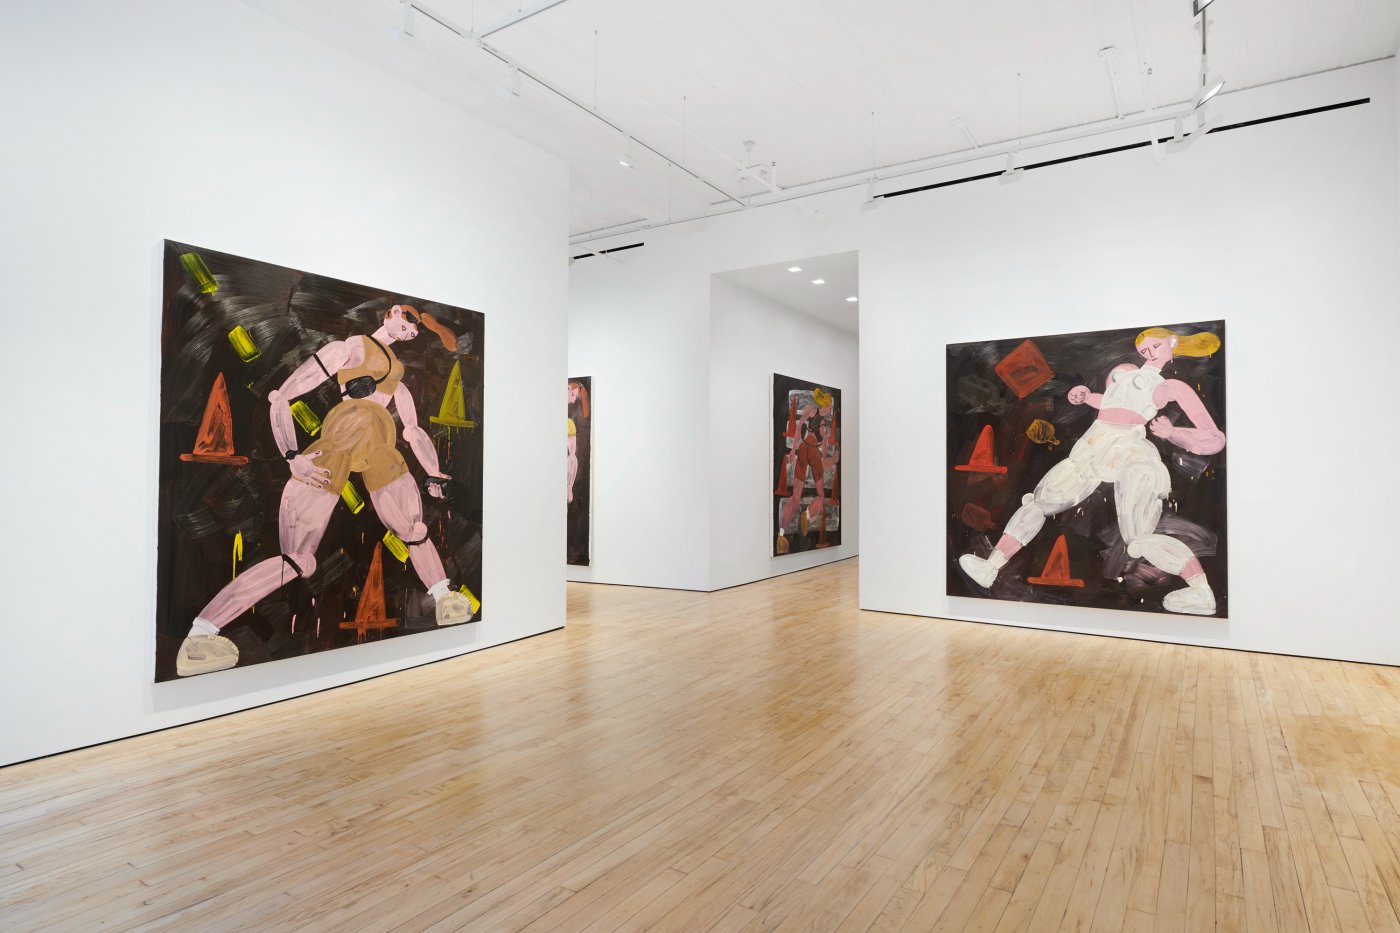 Installation image for Grace Weaver: 11 Women, at James Cohan Gallery